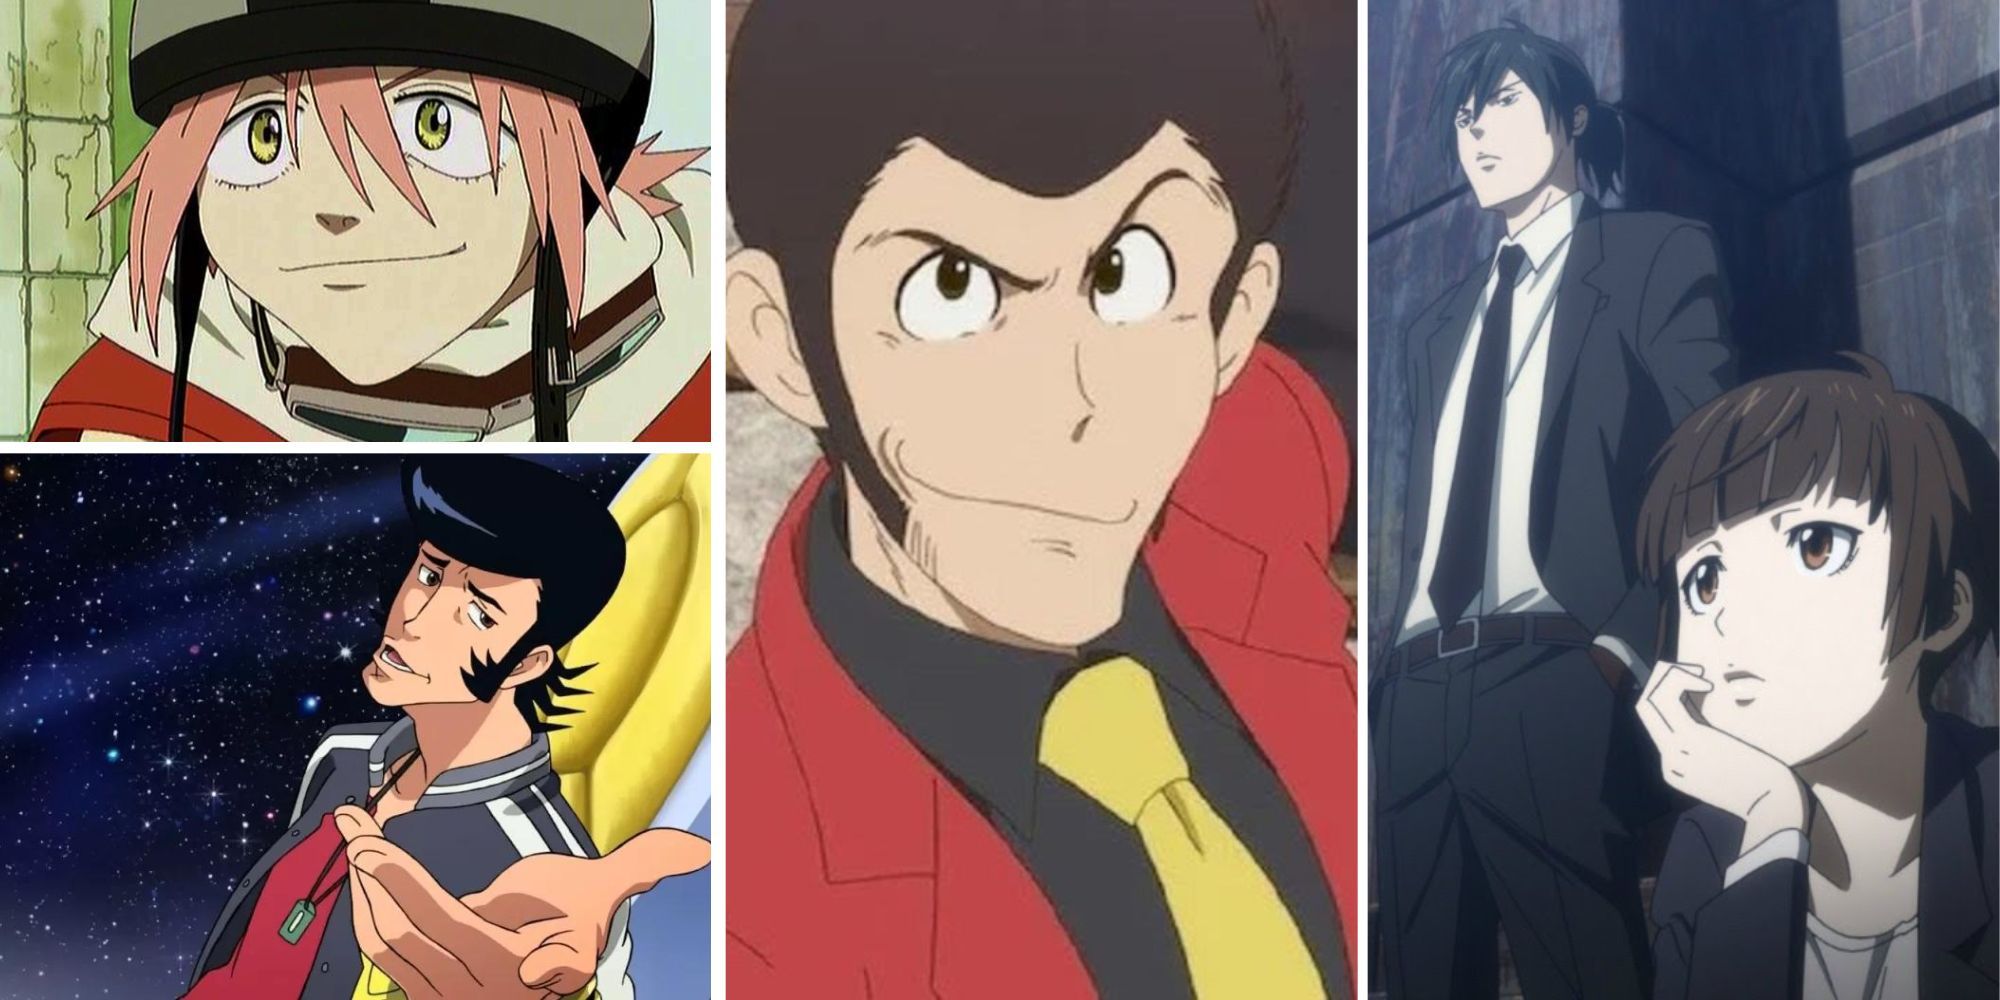 Collage of Animes Like Cowboy Bebop (FLCL, Space Dandy, Lupin the III, Psycho-Pass)